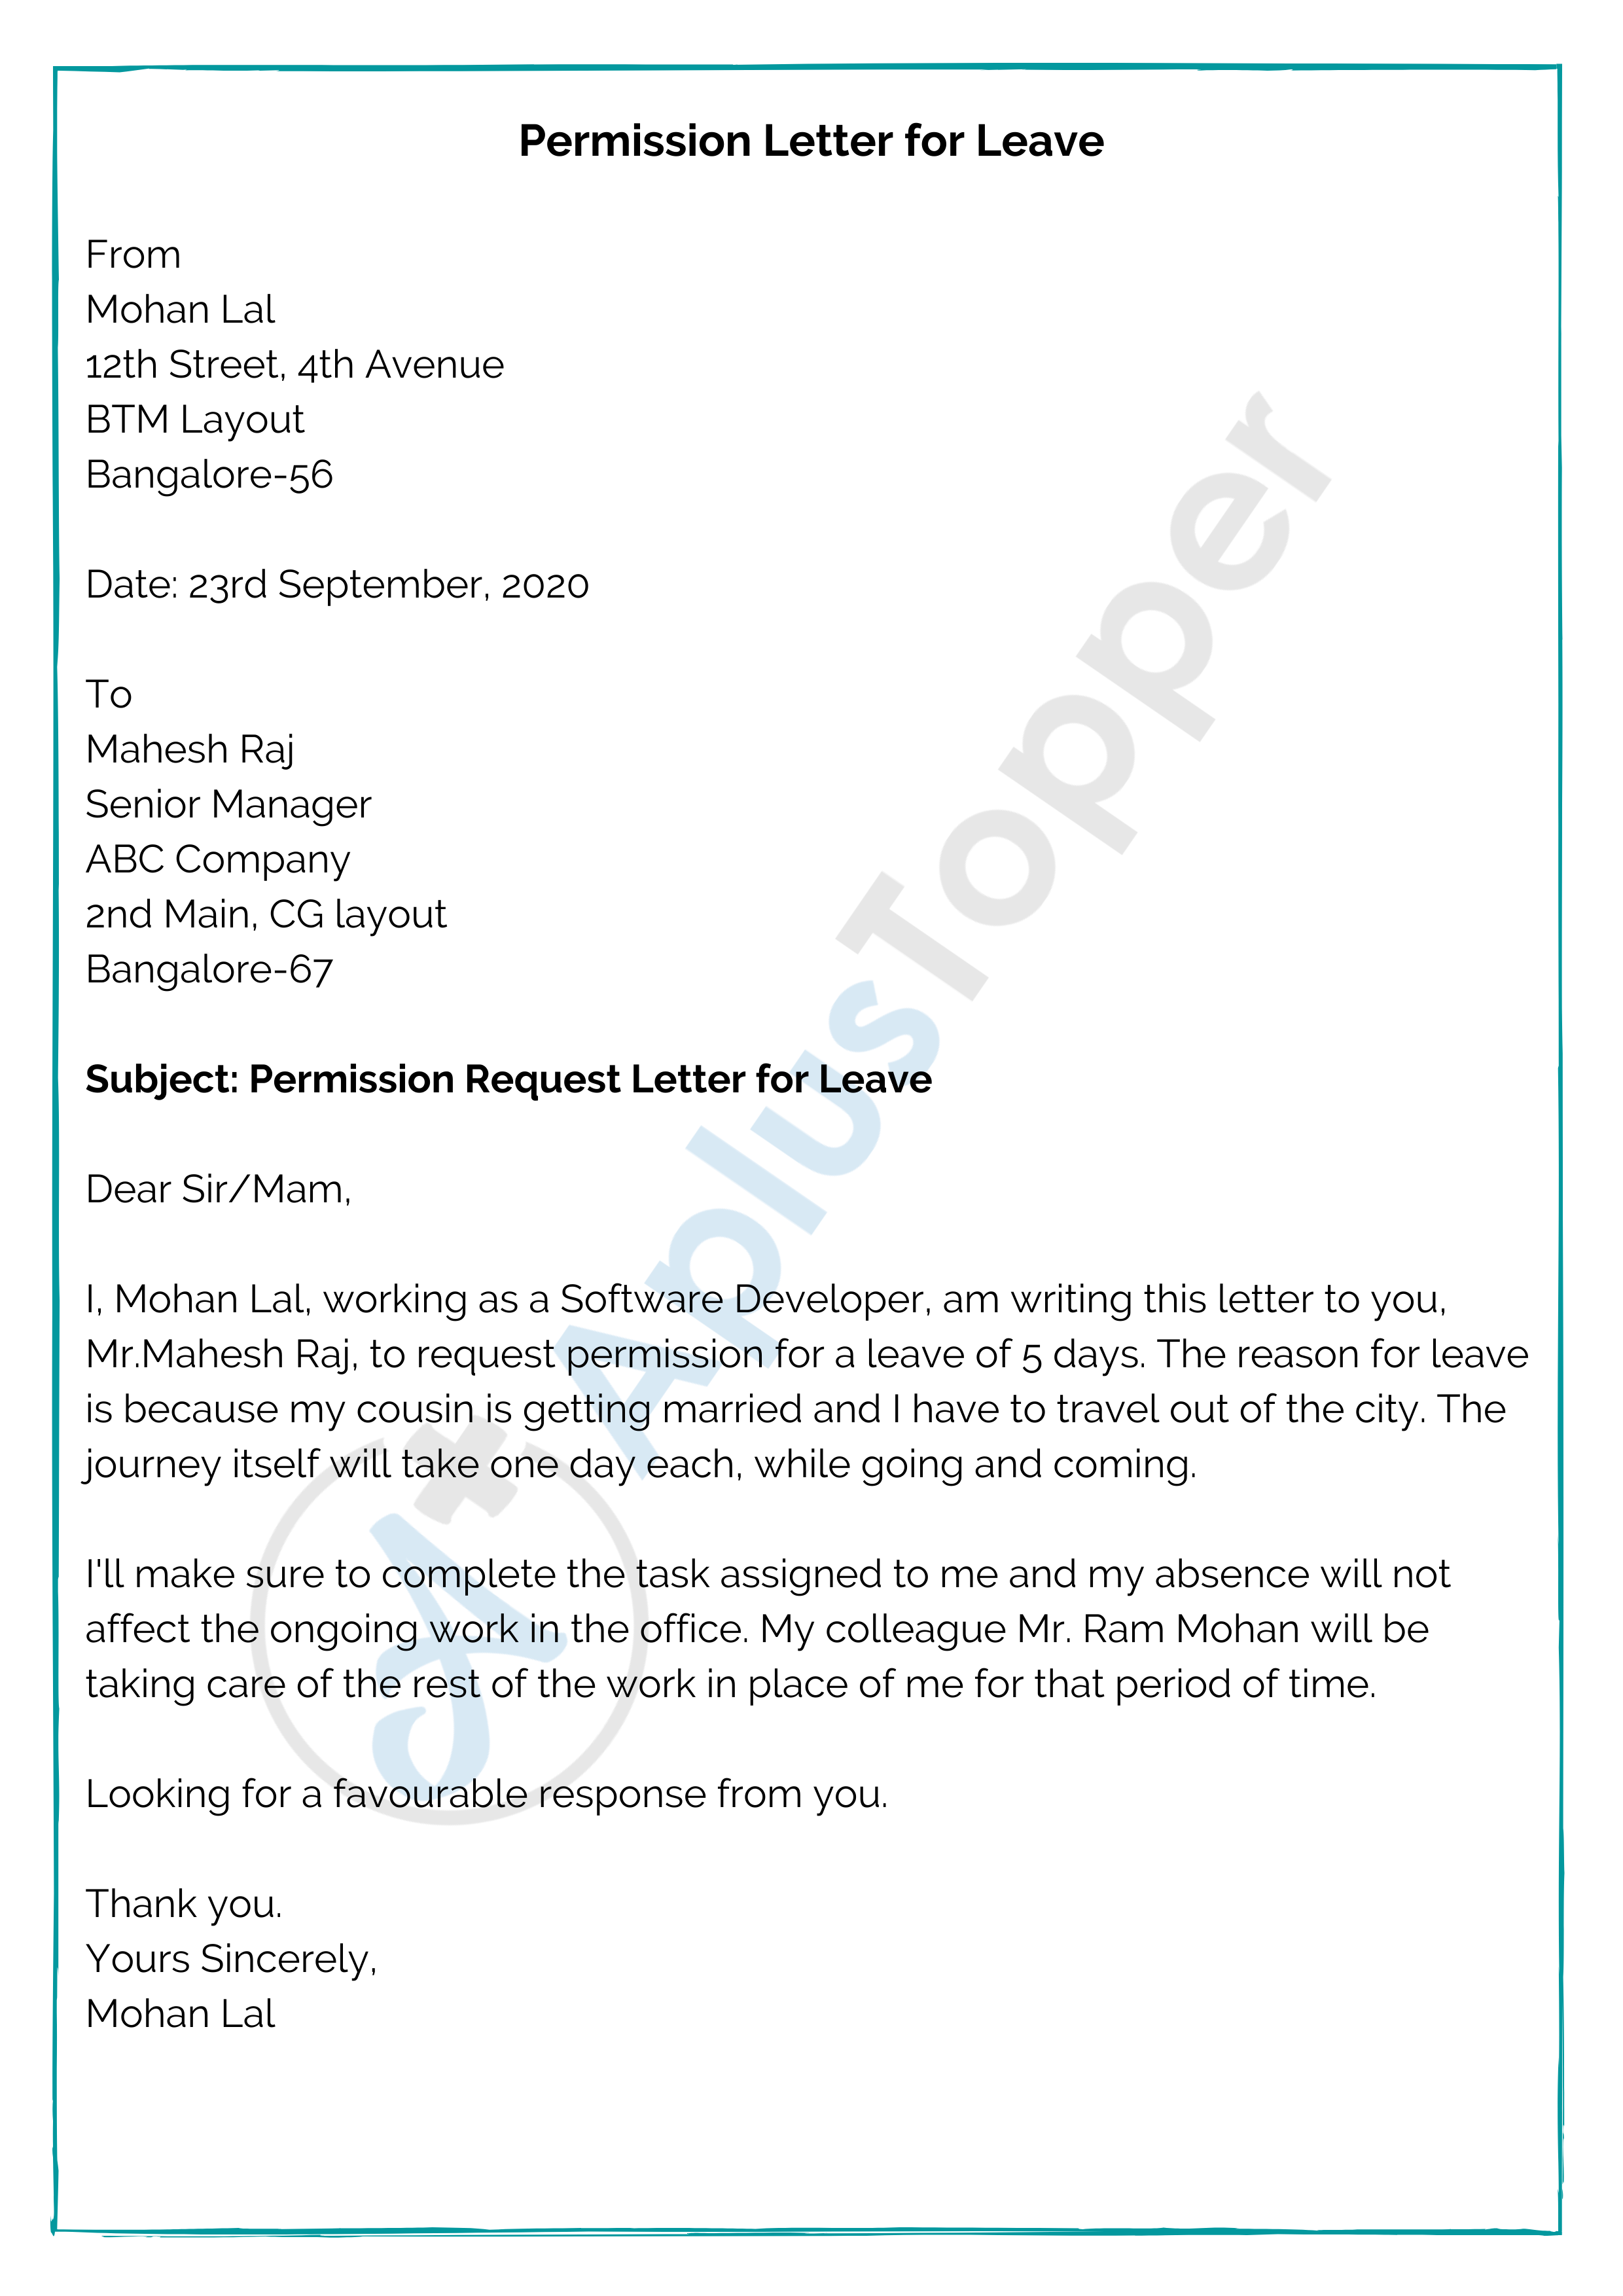 Permission Letter  Format, Samples, Templates, How to Write A